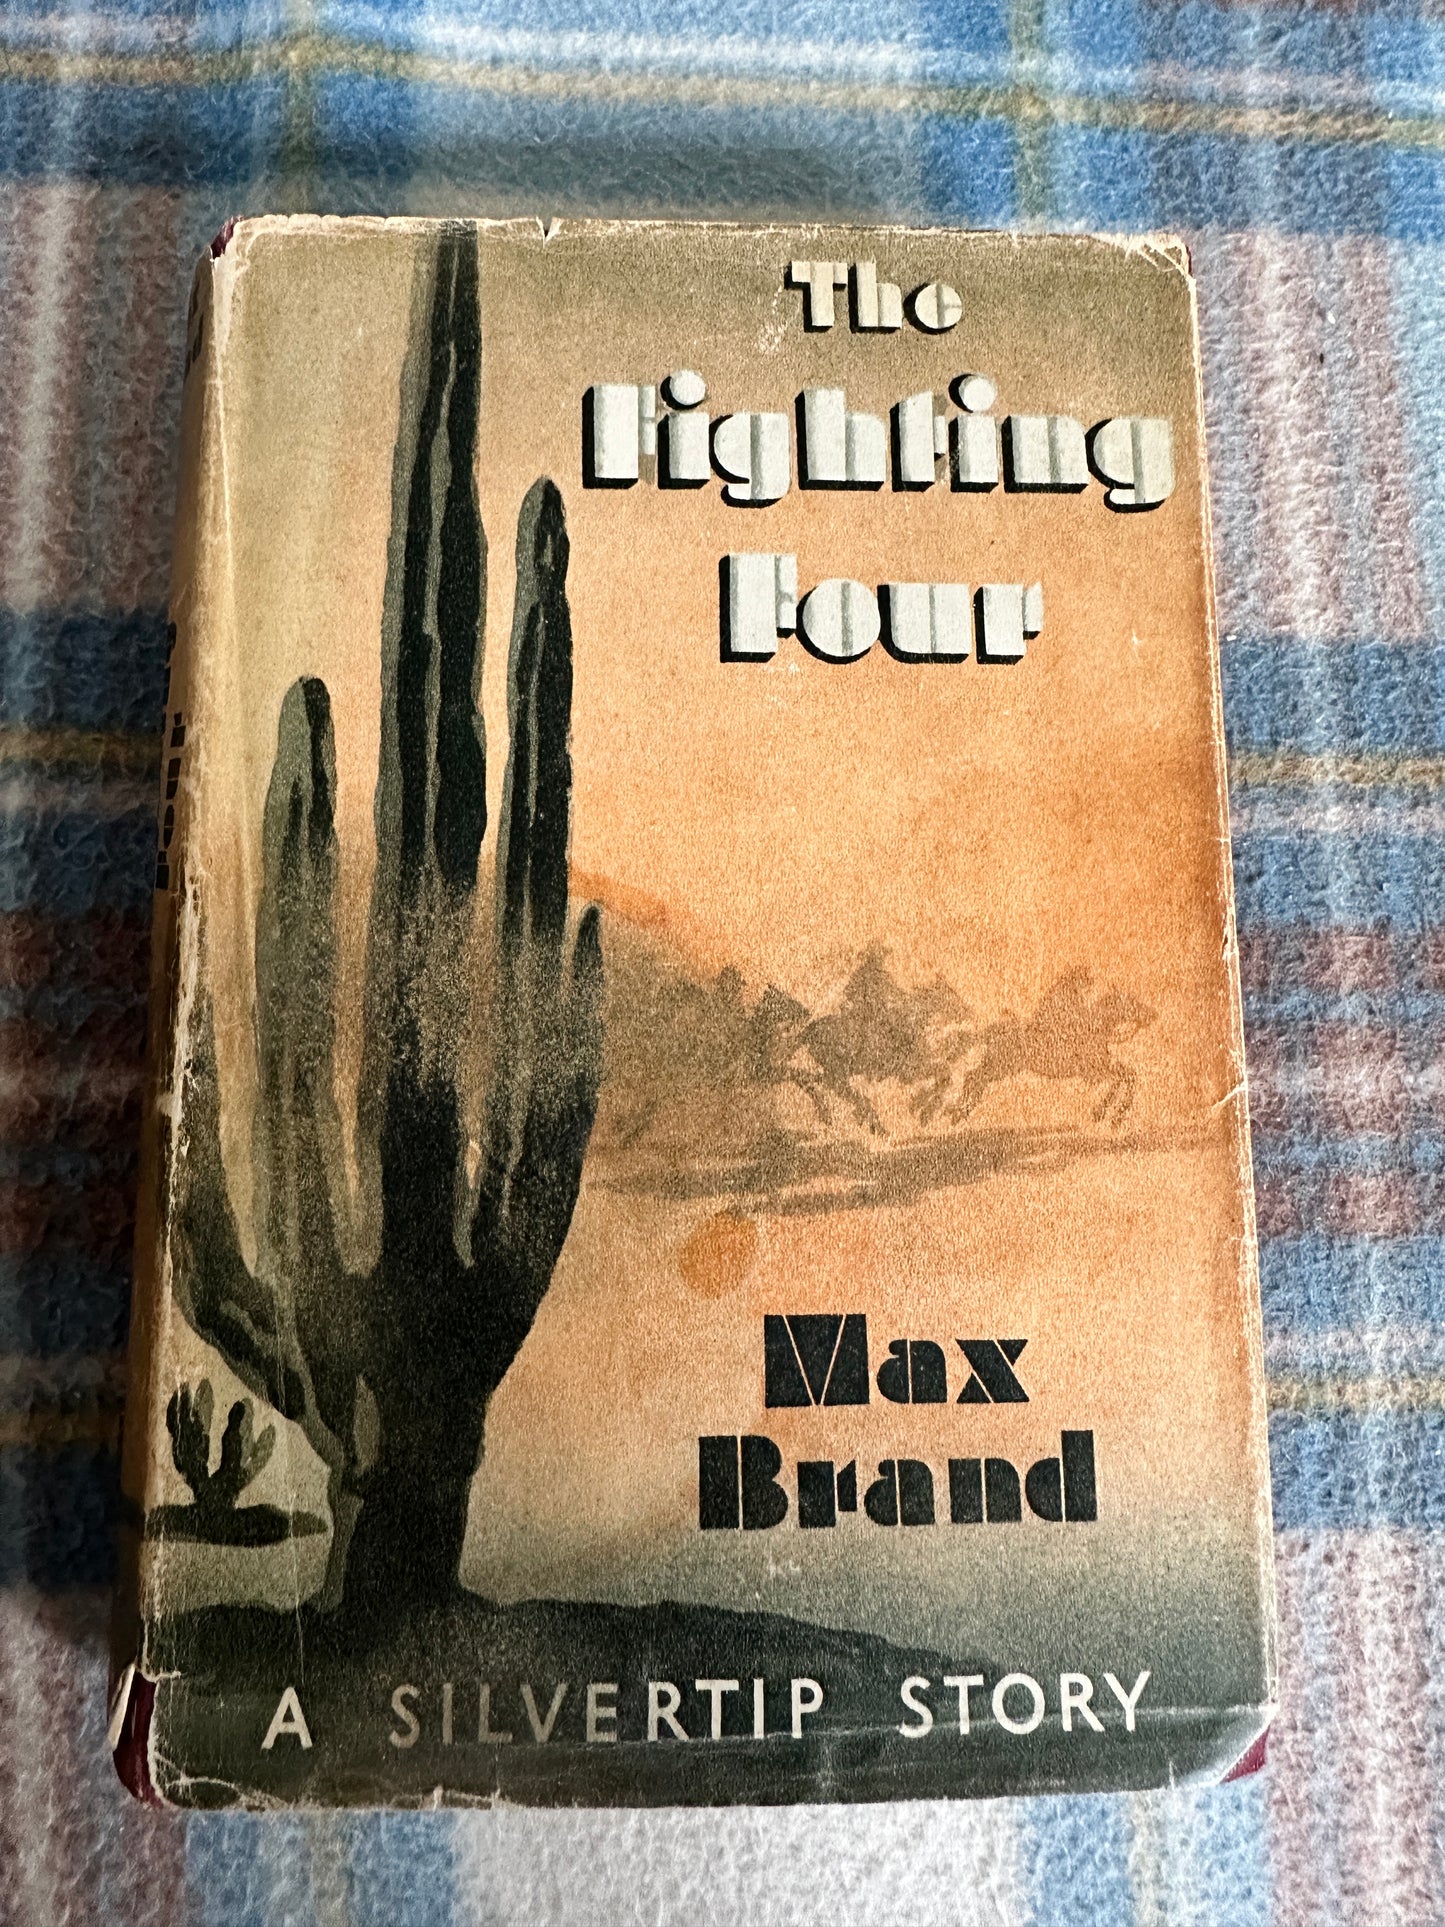 1948*1st* The Fighting Four(A Silvertip Story) Max Brand (Hodder & Stoughton)